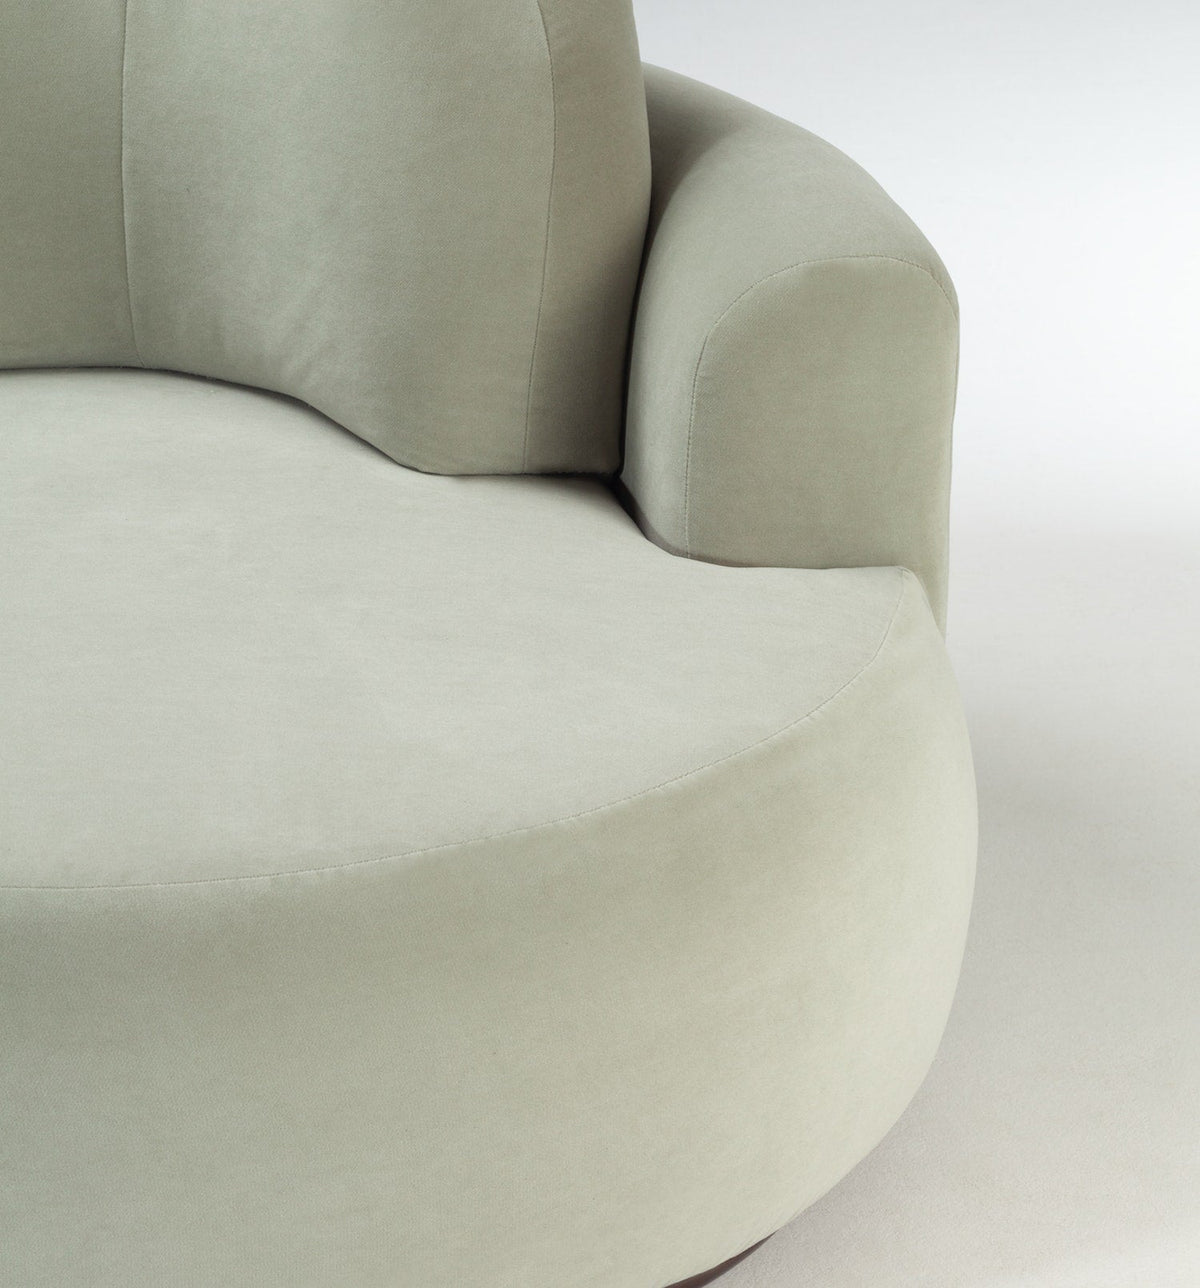 Naked Round Couch Sofa-Mambo-Contract Furniture Store